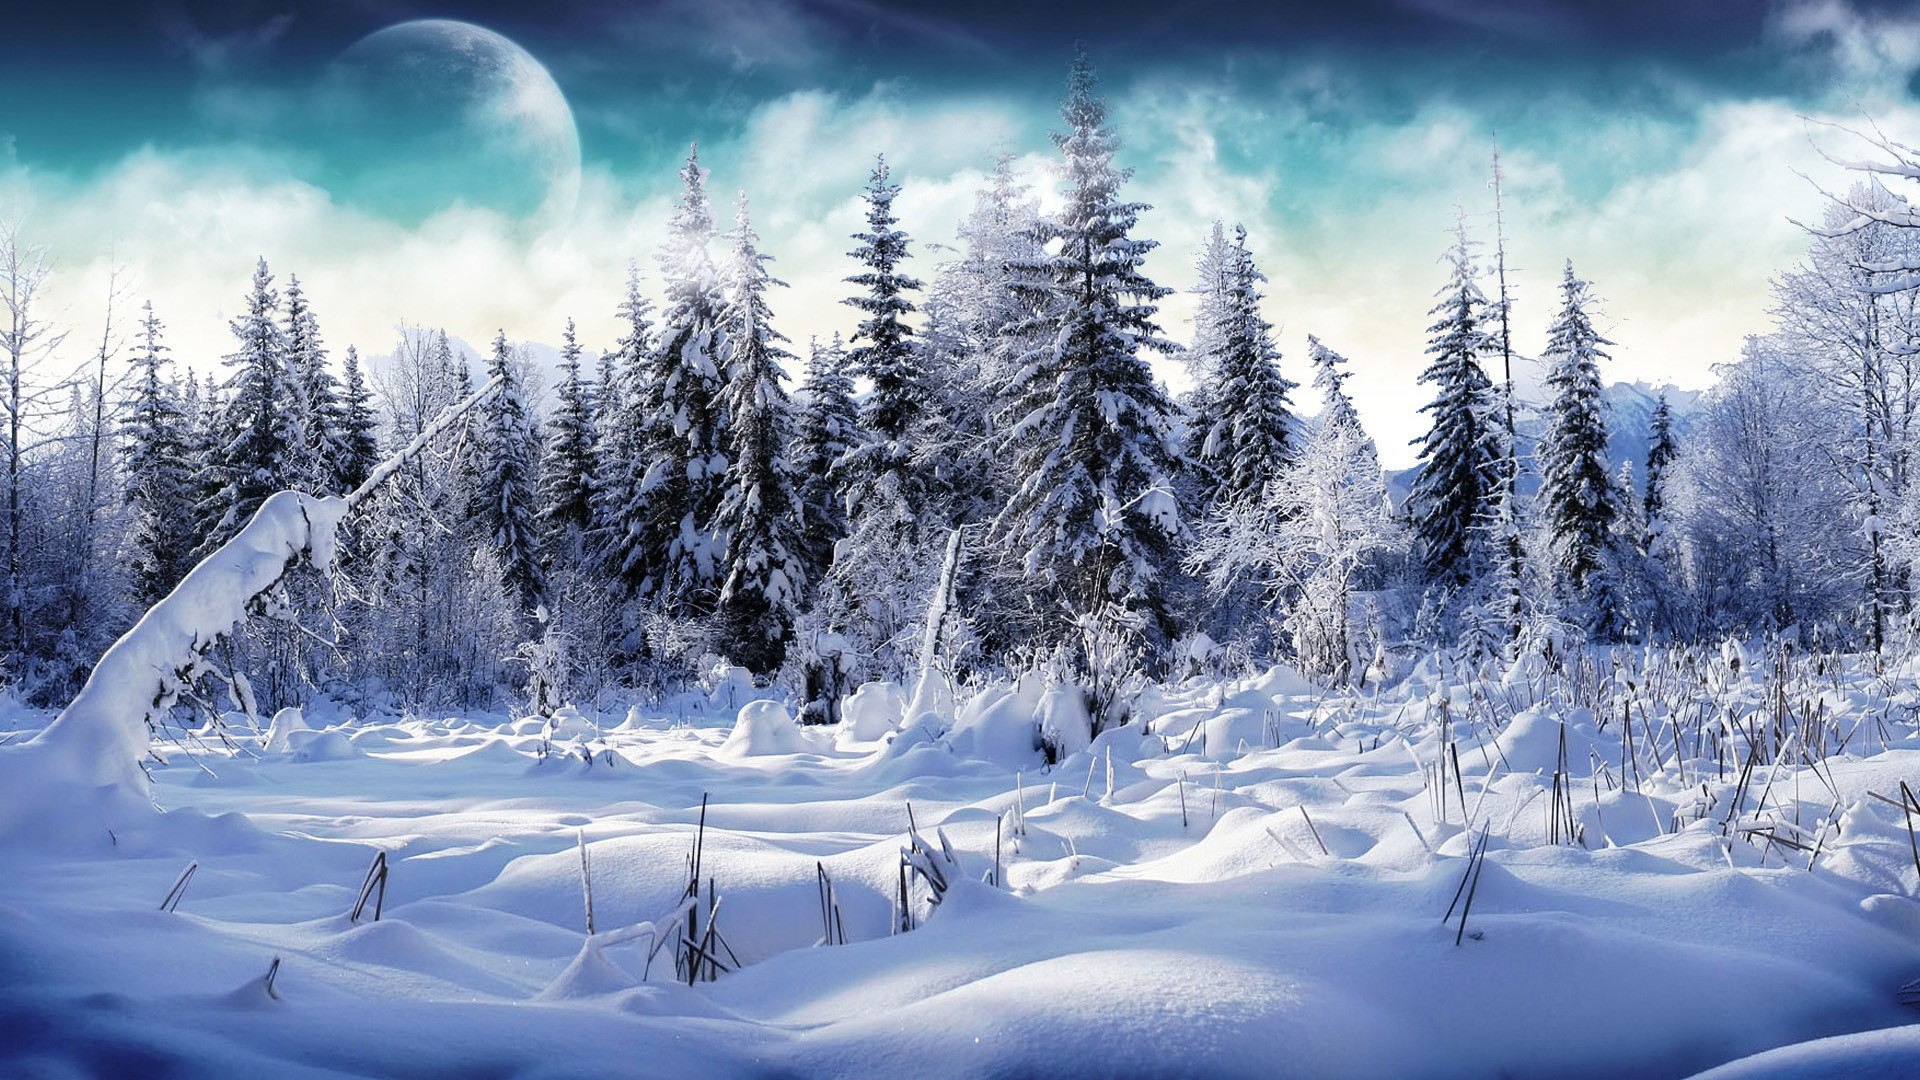 1920x1080 Snow Wallpaper on Best HD Wallpapers http://hdw9.com/social-gallery/snow- wallpaper-hd | just because i like it | Pinterest | Air tickets, Snow falls  and ...